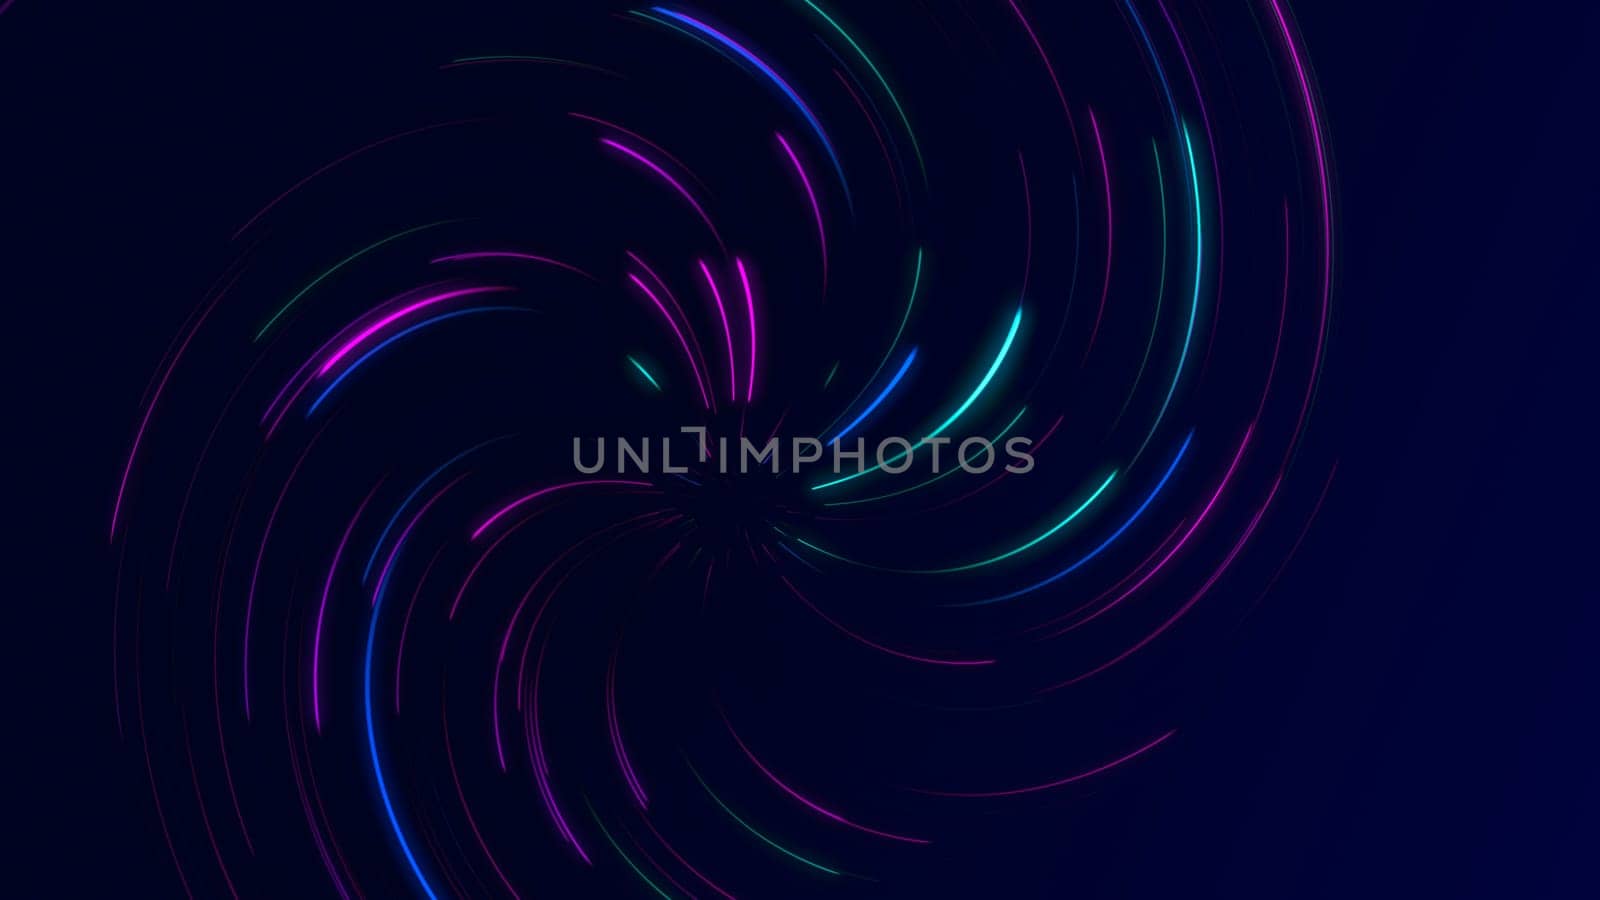 Dynamic abstract design featuring colorful neon light swirls against a dark backdrop, creating a vibrant, futuristic effect.